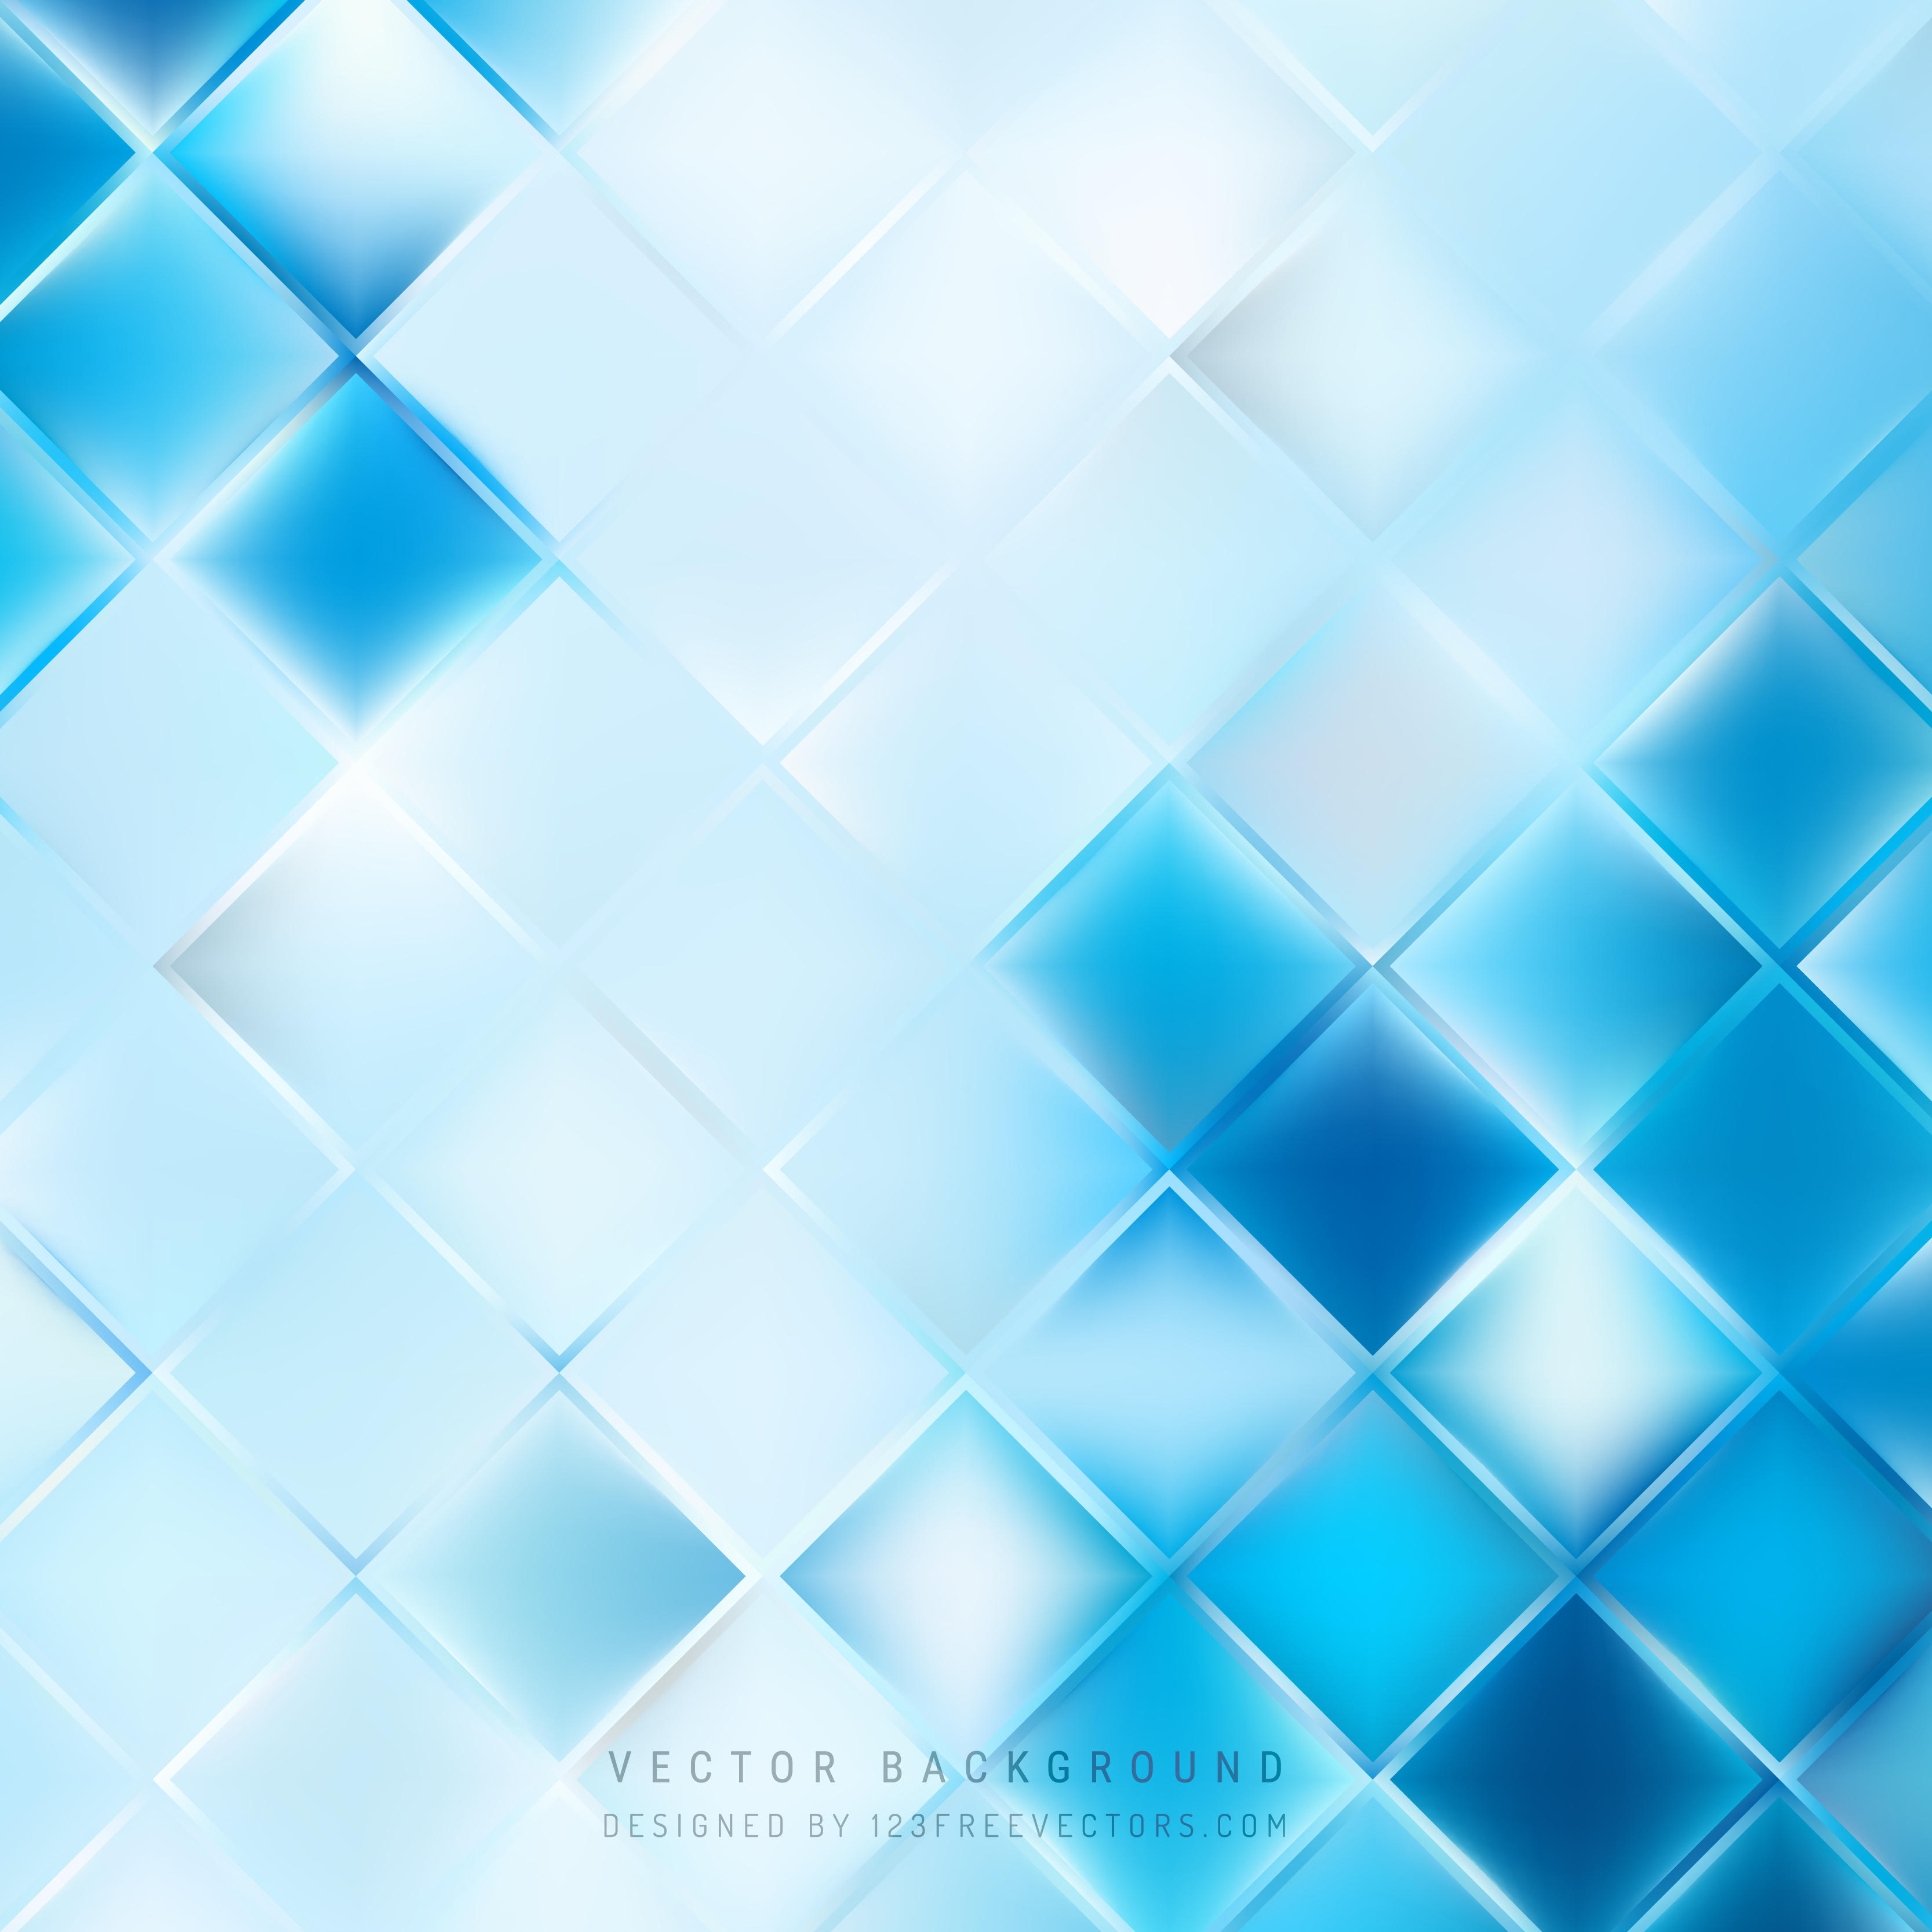 Abstract Light Blue Square Background Design | 123Freevectors